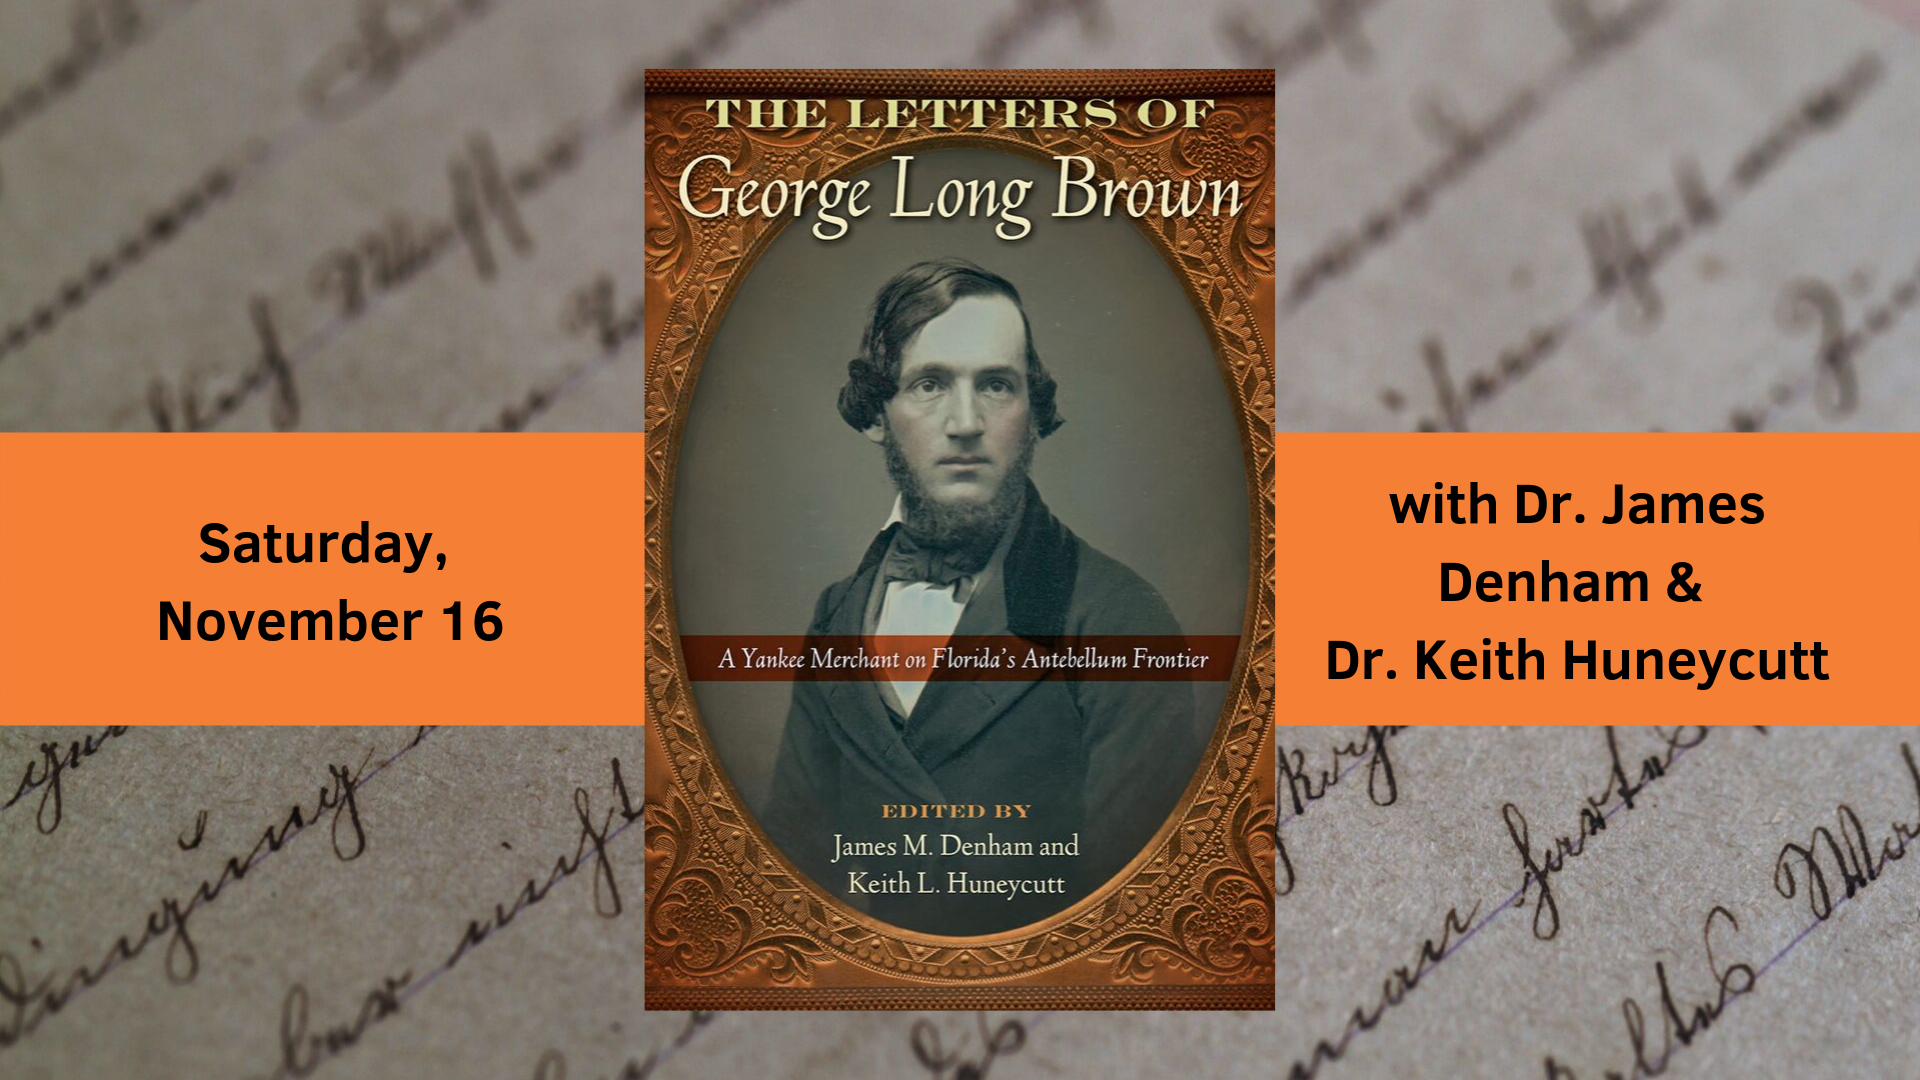 https://humanities.ufl.edu/wp-content/uploads/sites/67/Letters-of-George-Long-Brown_FB.png